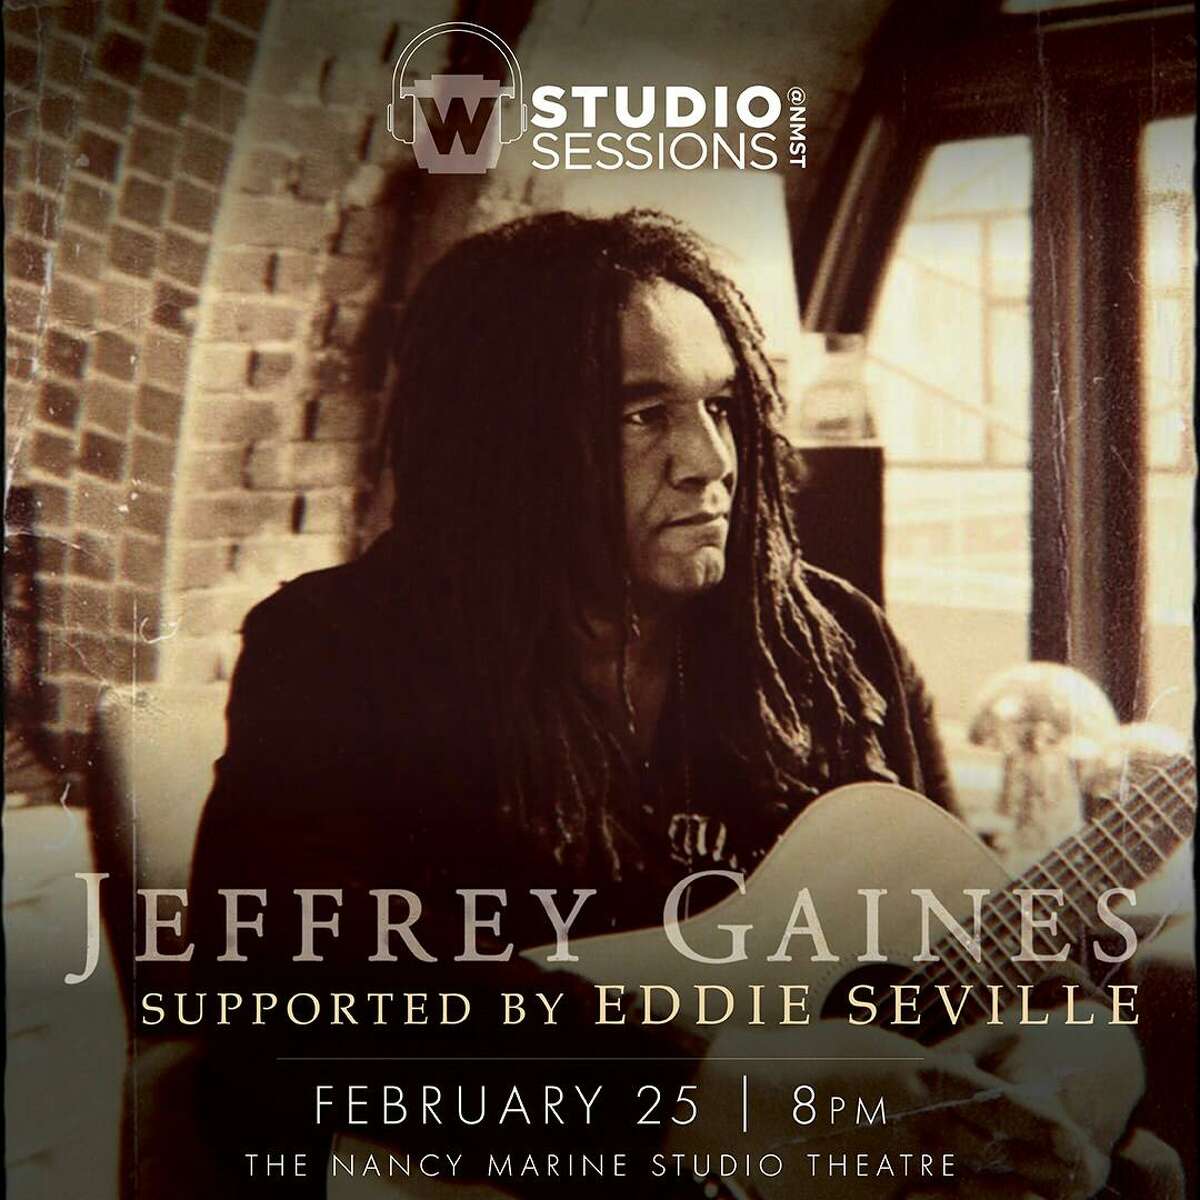 Jeffrey Gaines with Eddie Seville, at 8 p.m. Feb. 25. Each Studio Sessions & NMST concert will feature an acoustic set by area performers in an intimate setting. Cabaret-style seating will be available at the front of the theatre, as well as regular seating.